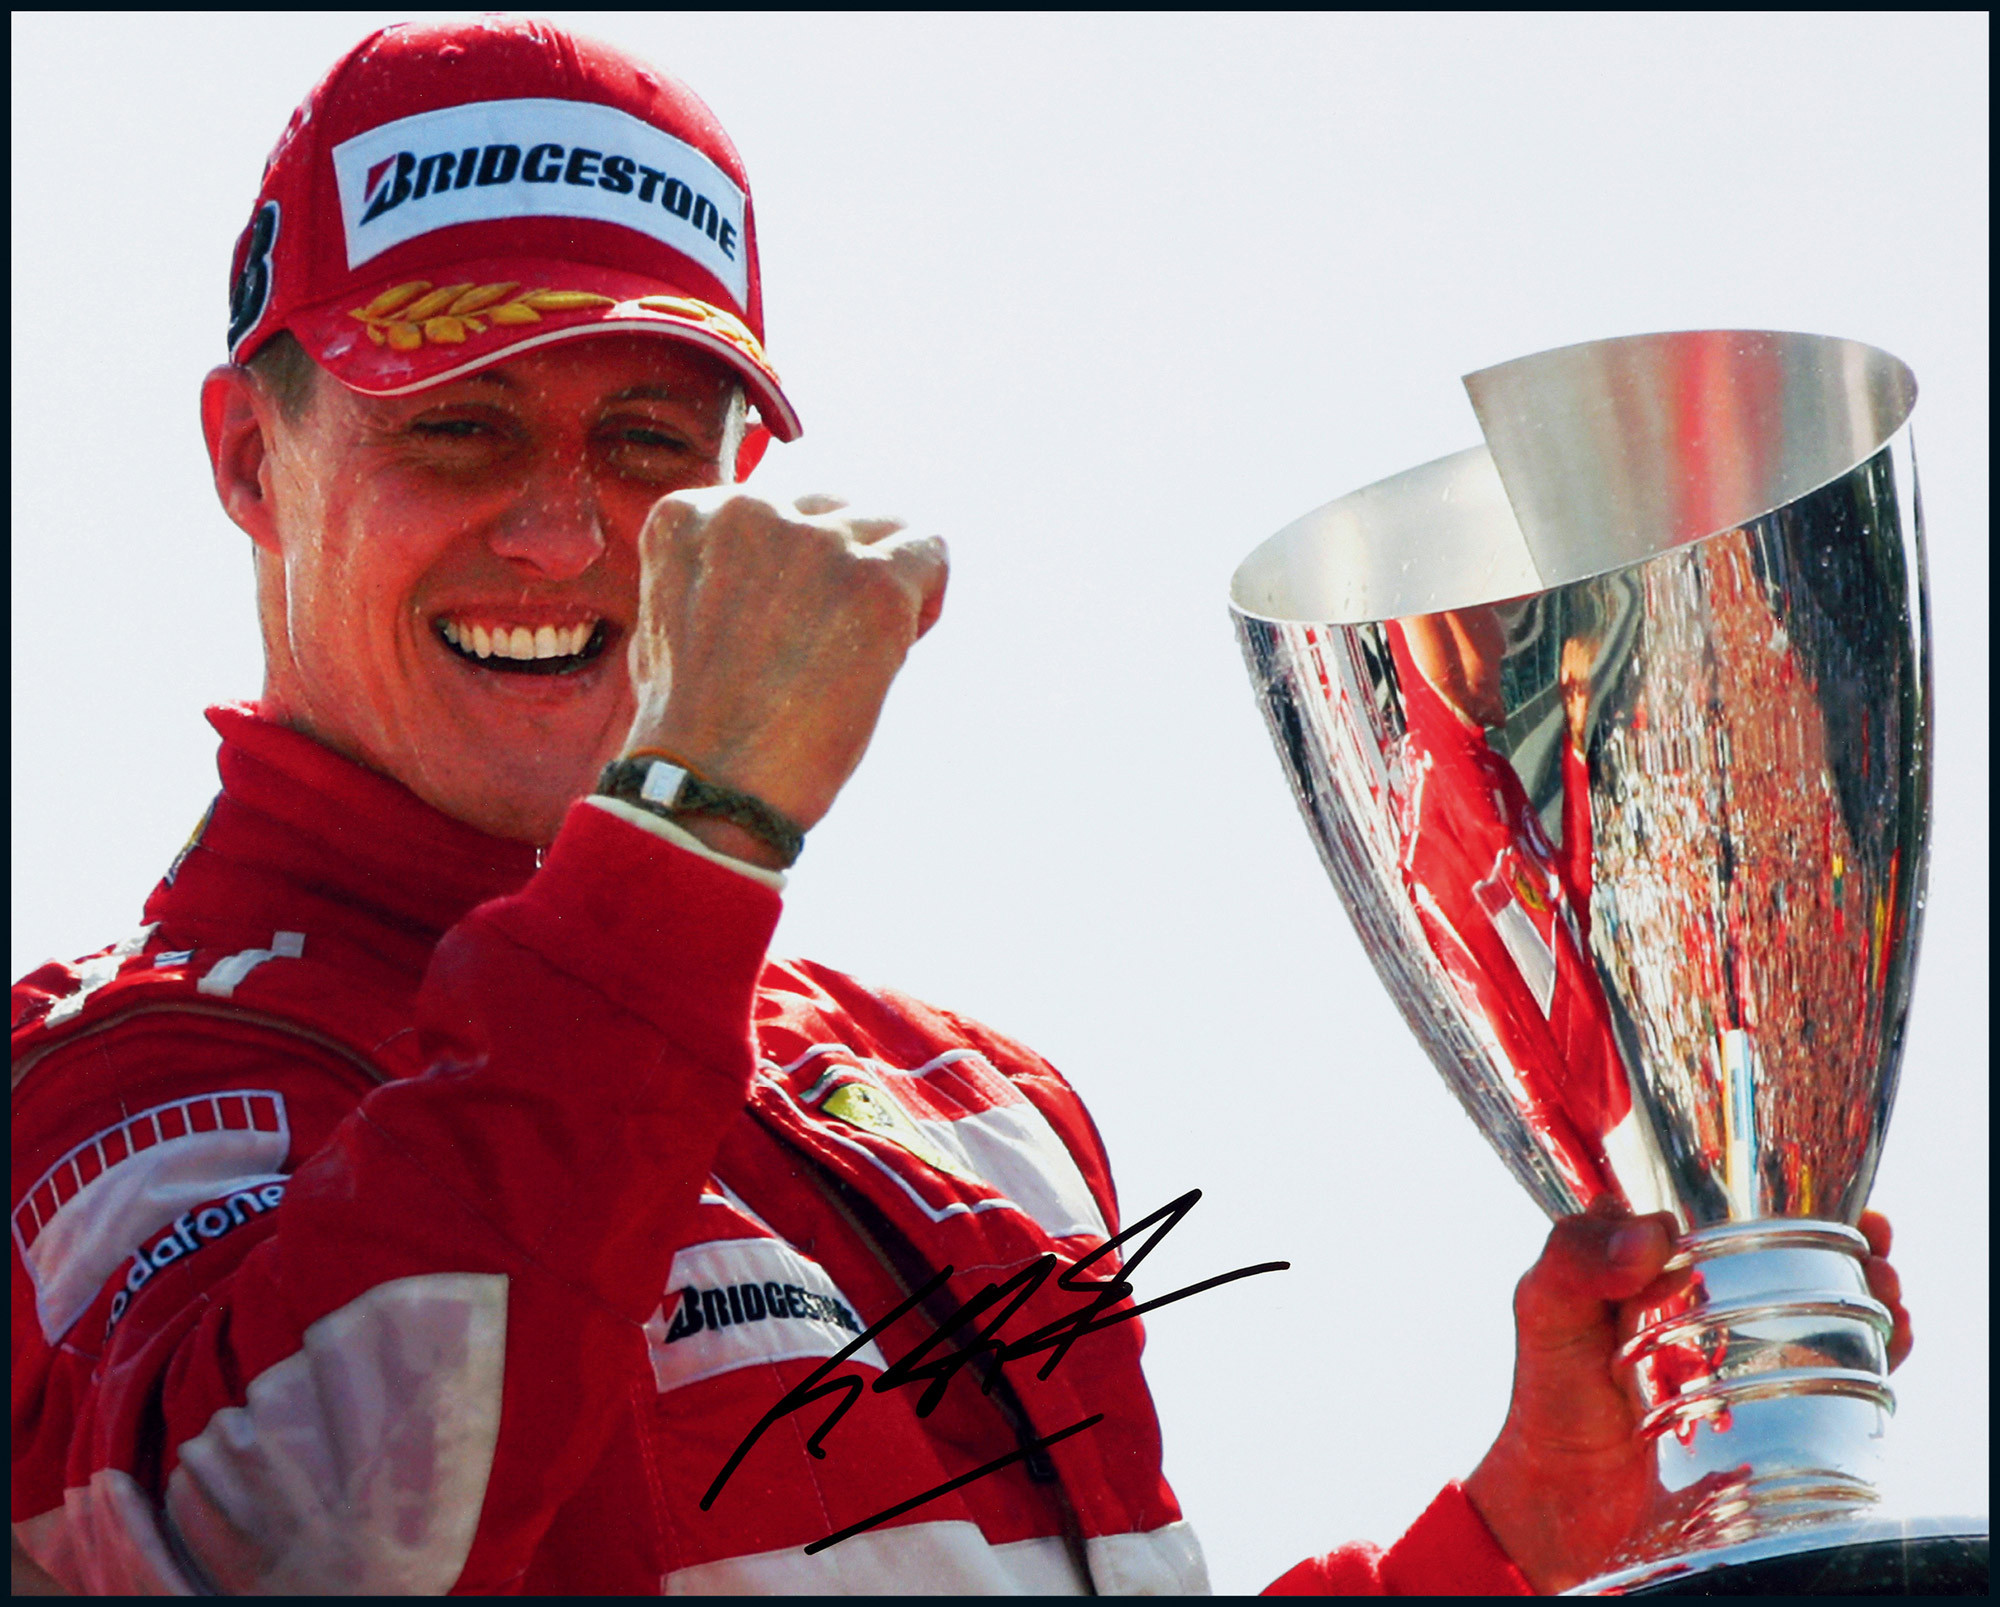 The autographed photo of Michael Schumacher, “F1 Driver”, with certificate